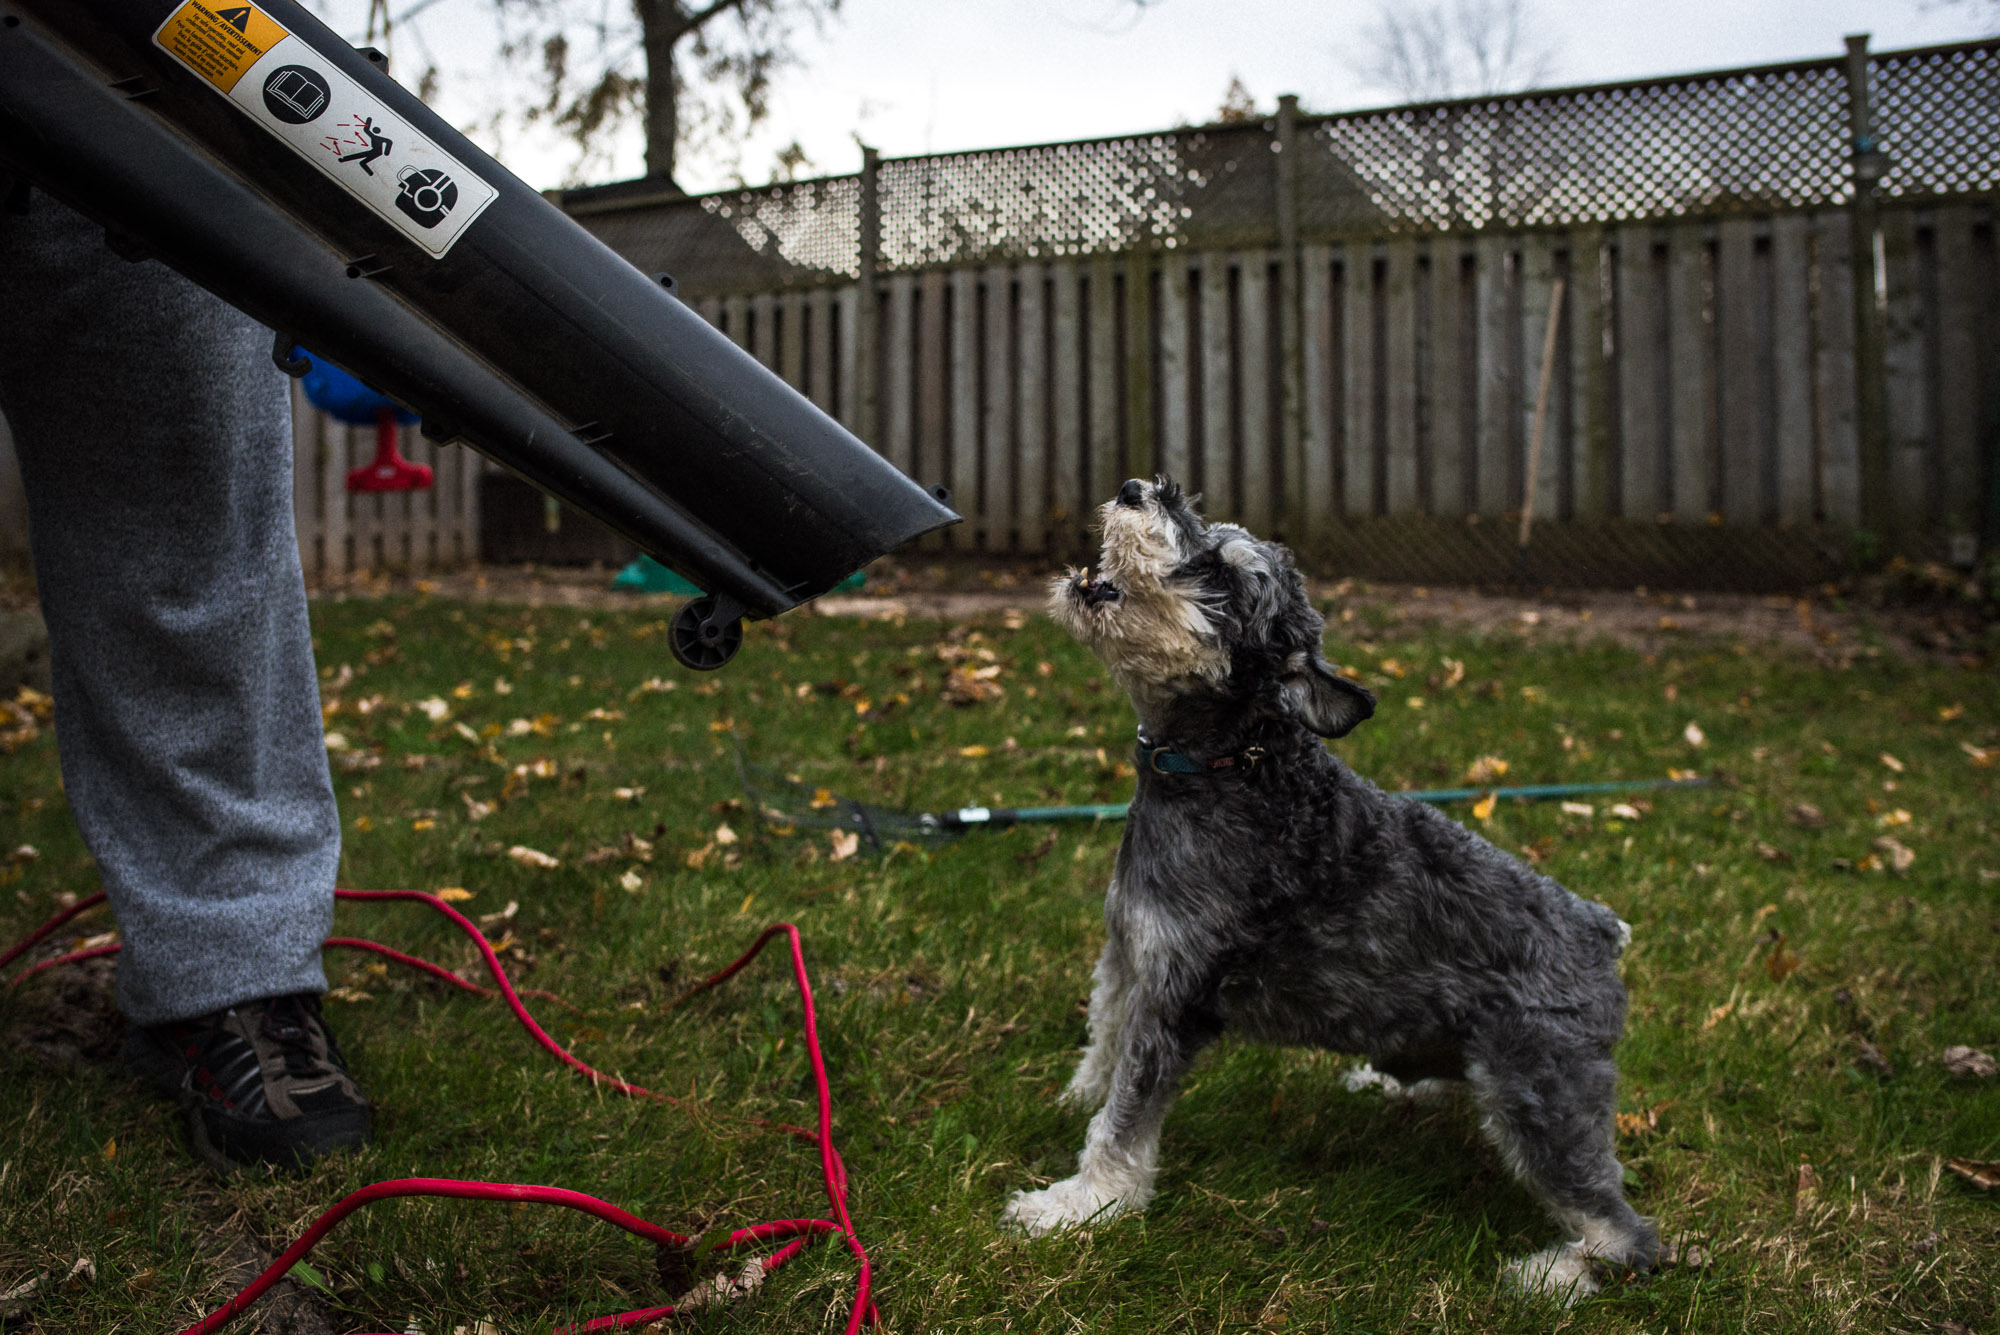 terrier dog looks up directly at leafblower